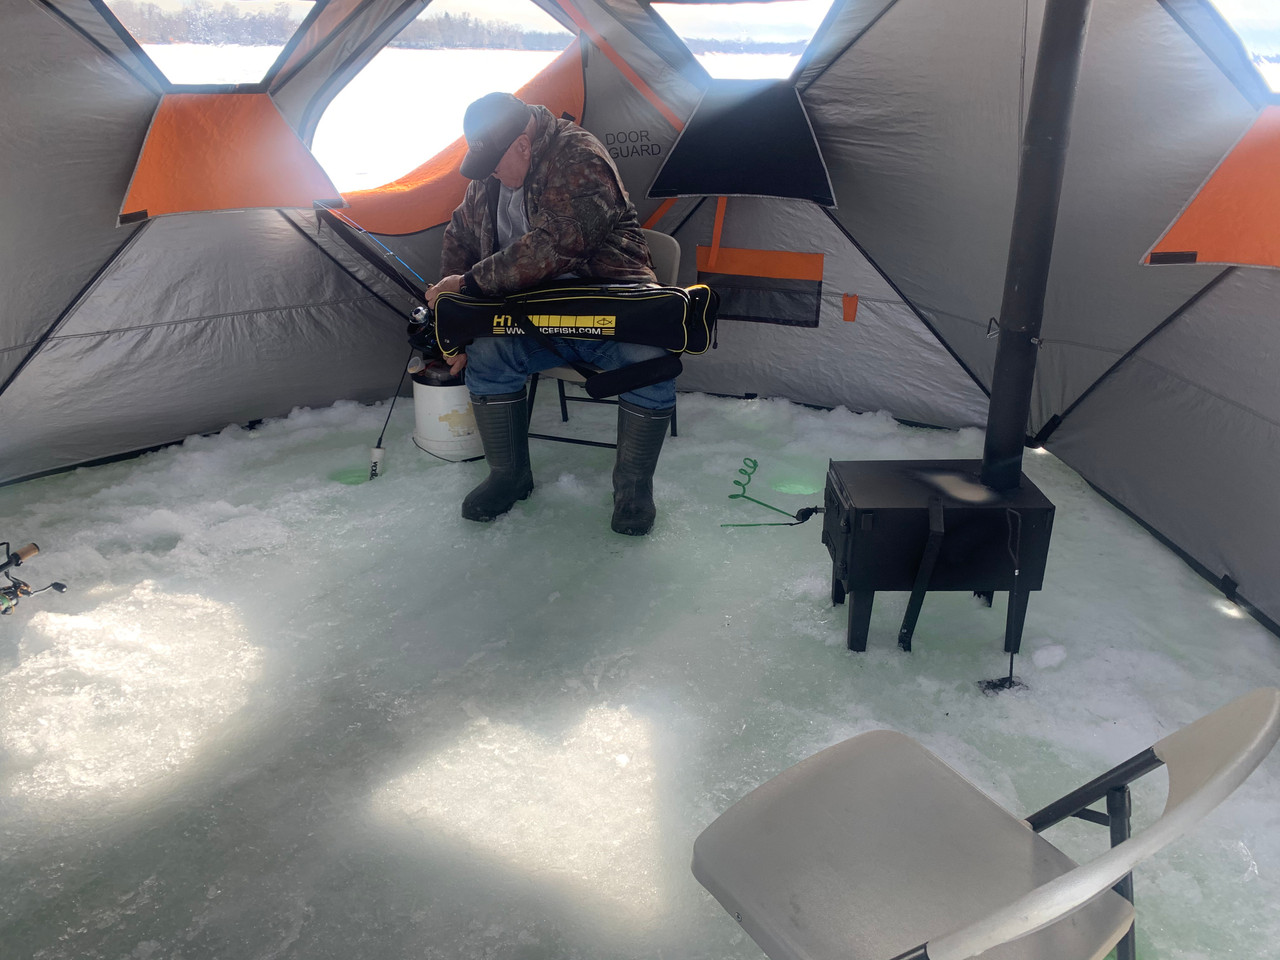 NORDIC LEGEND Double Hub 6-8 Person Ice Shelter Ice Fishing Tent